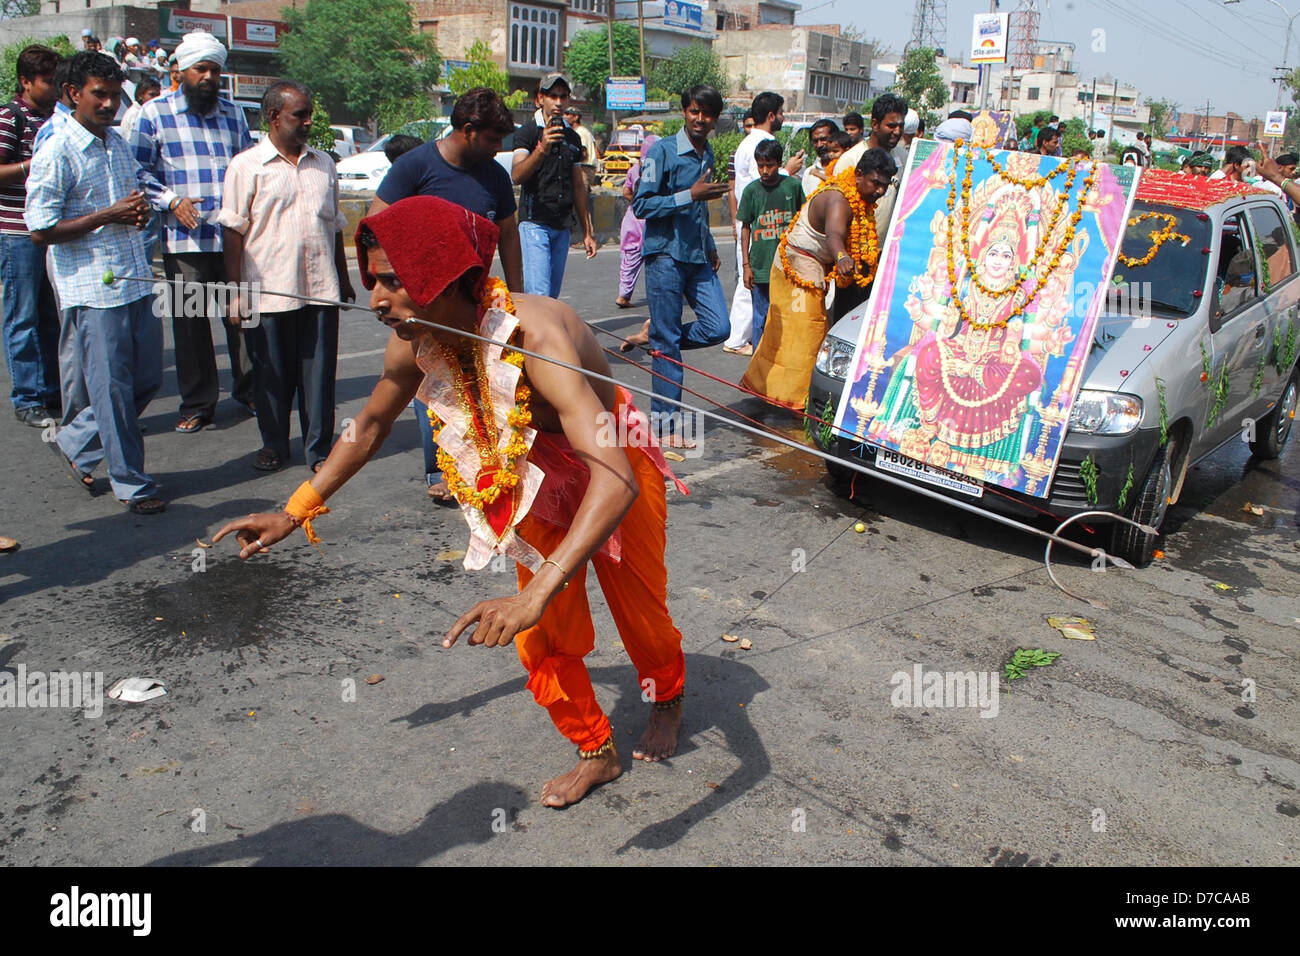 A Hindu devotee pulls a car with ropes, attached to hooks, piercing his back, as he takes part in a religious procession Stock Photo